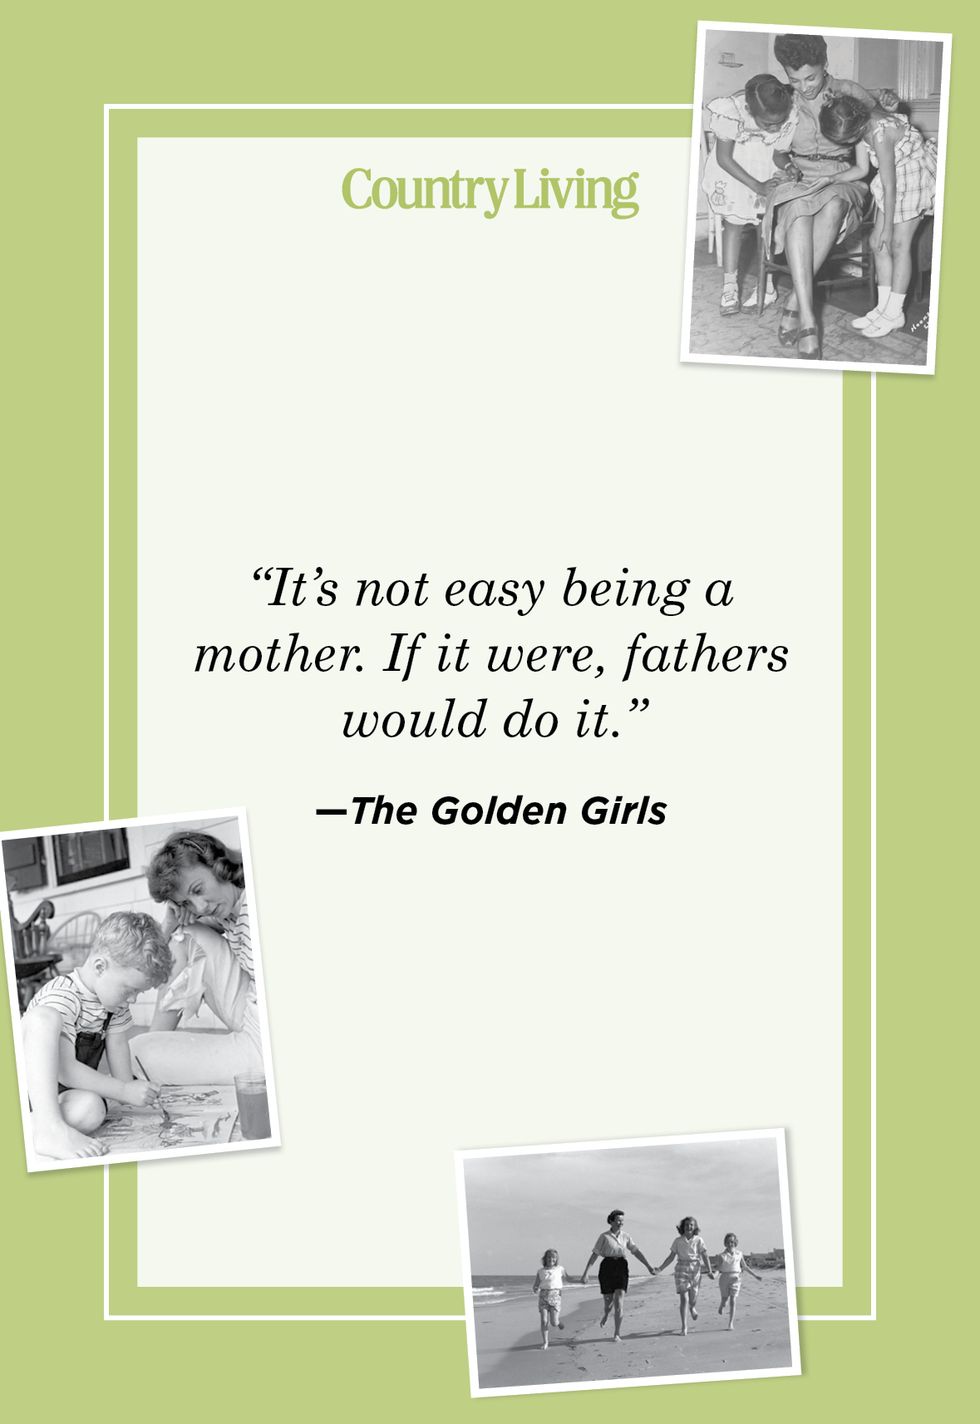 https://hips.hearstapps.com/hmg-prod/images/mothers-day-quotes-the-golden-girls-6446a08cb5294.jpg?crop=1xw:1xh;center,top&resize=980:*